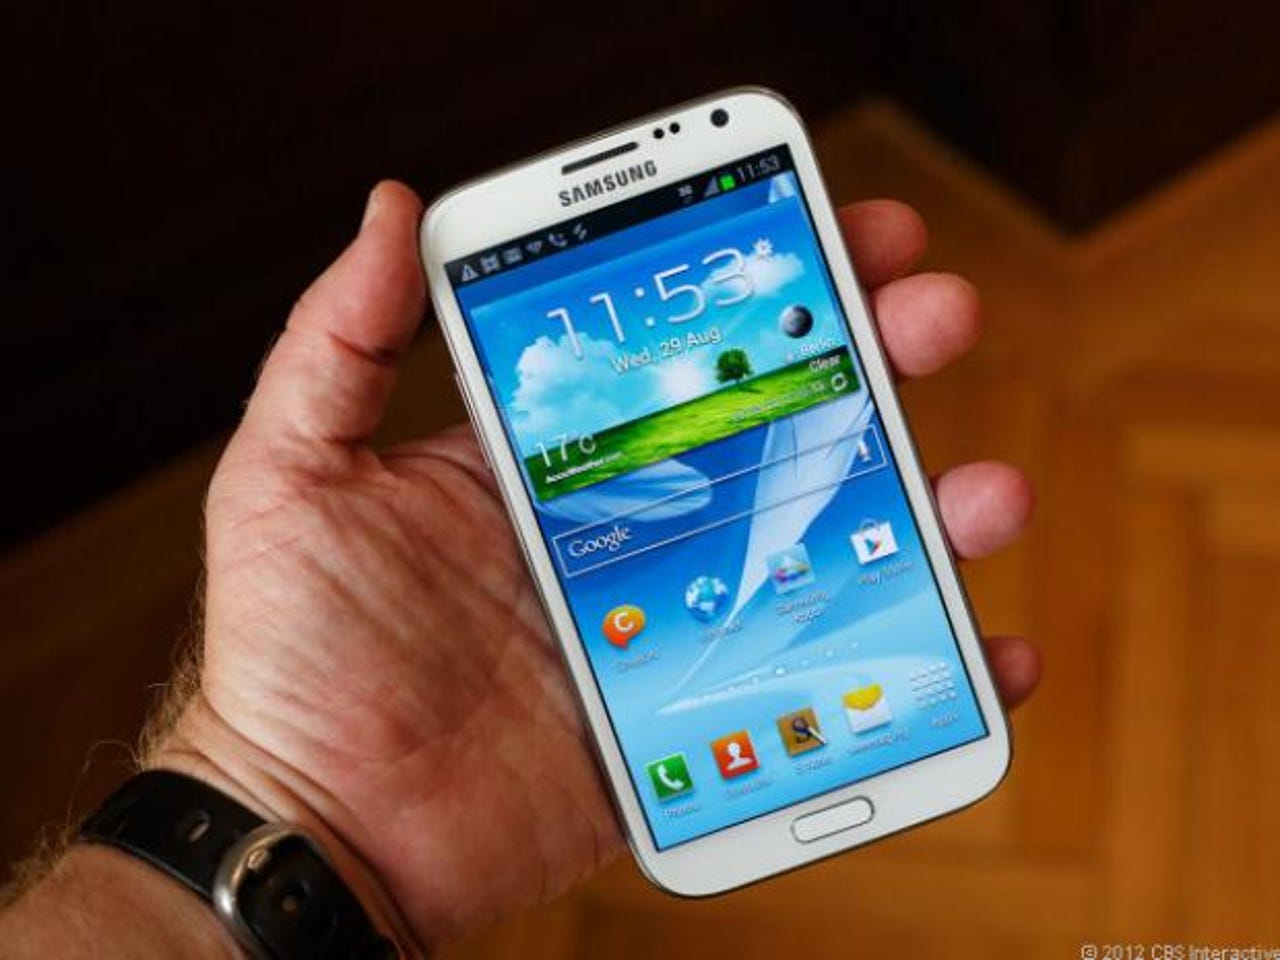 Samsung to equip Android phones with enterprise antivirus software